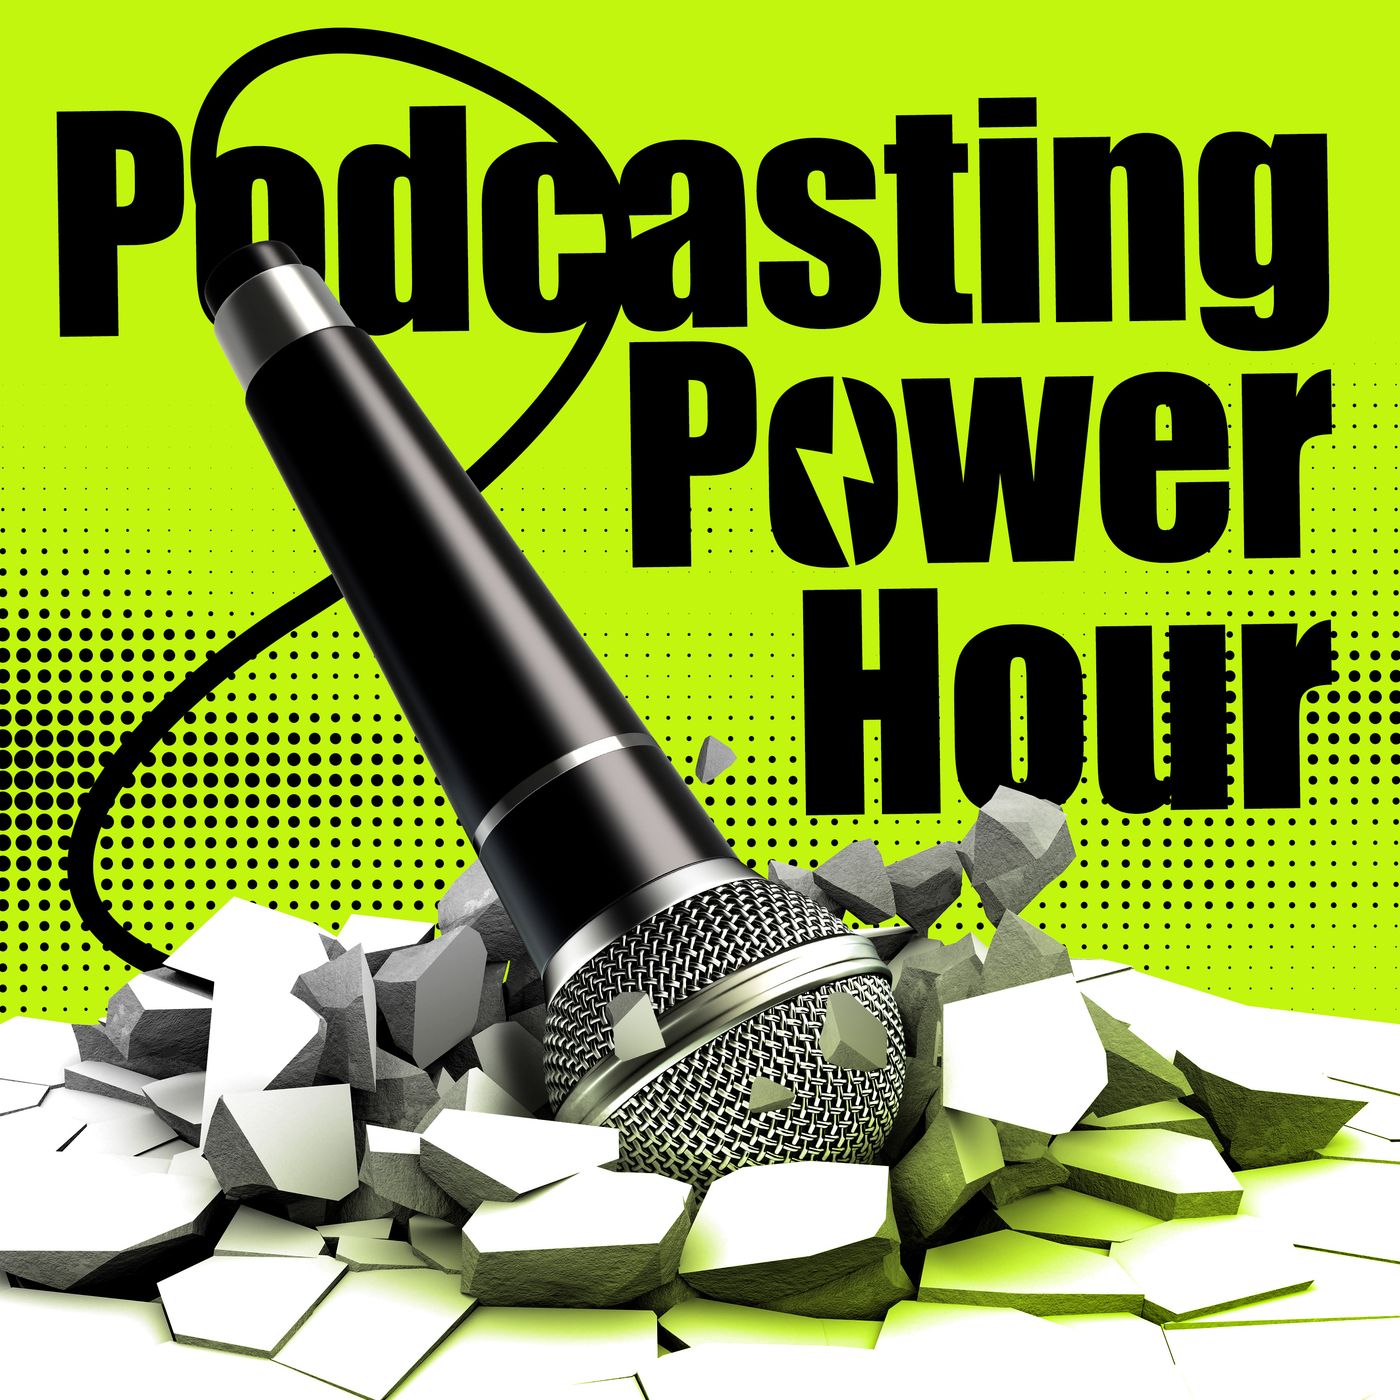 Podcasting Power Hour: Should all podcasts have seasons? Special Guest Fatima Zaidi CEO of Quill Inc.